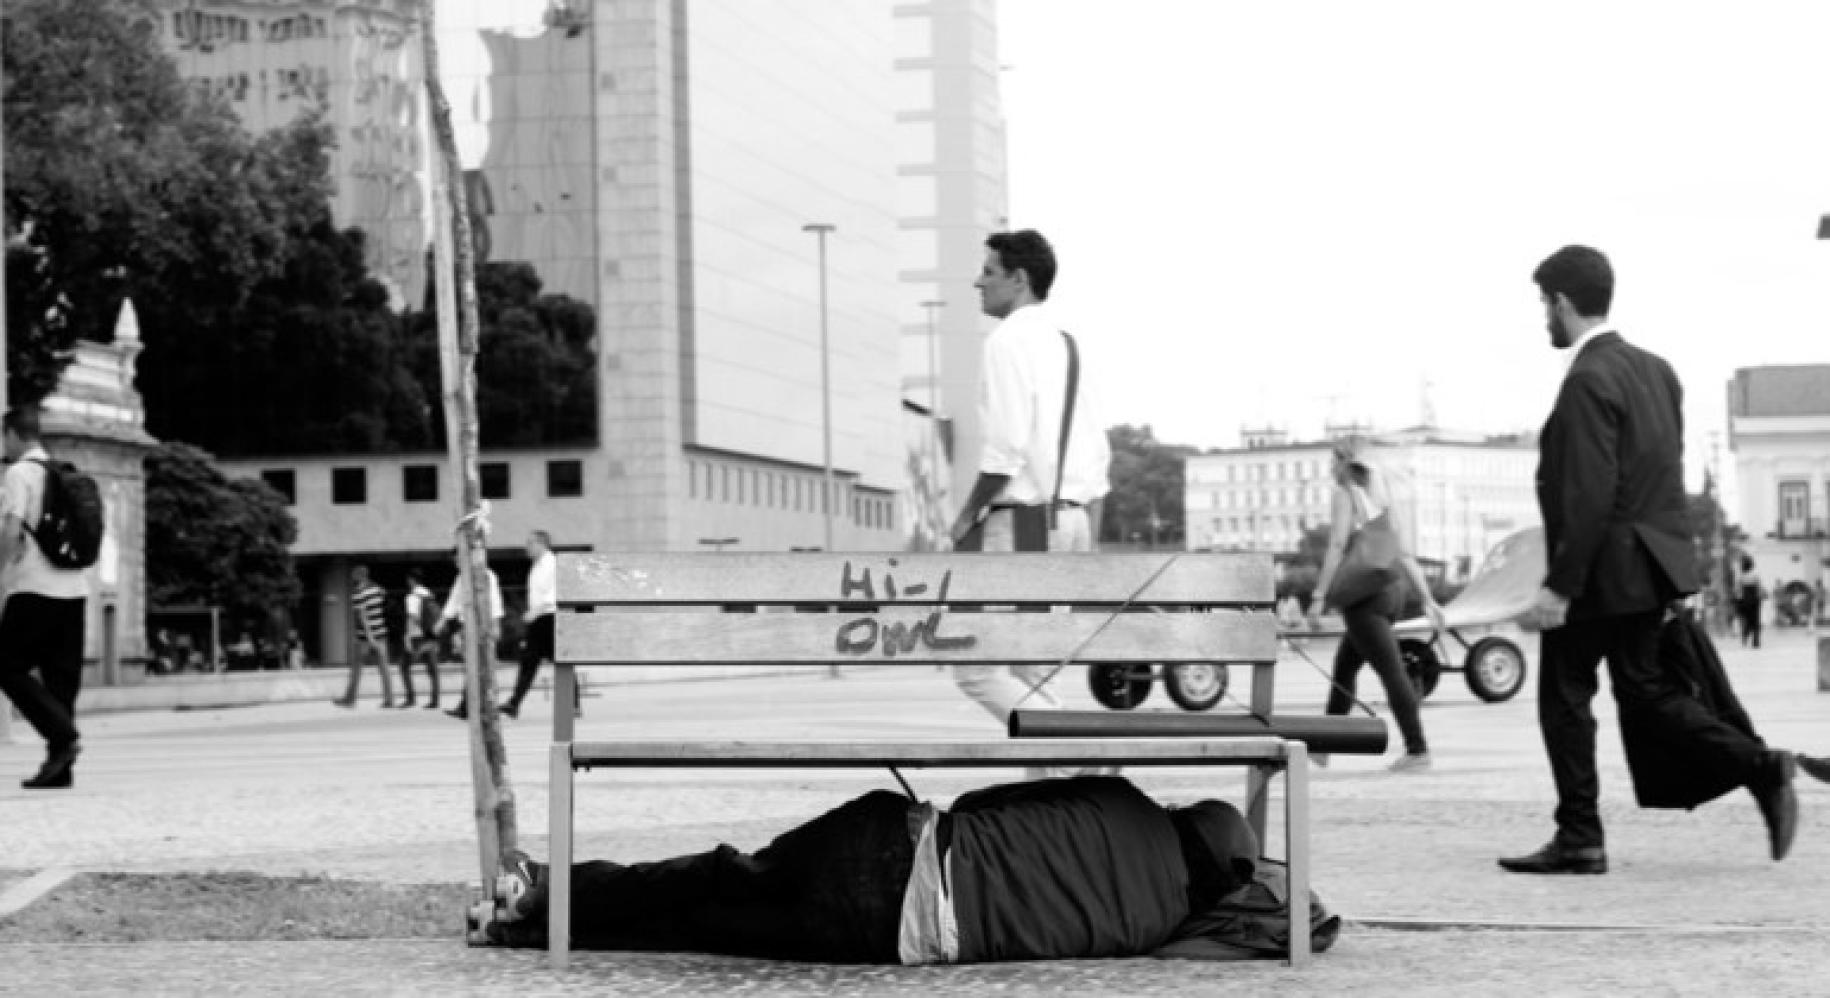 A homeless person sleeps in the streets under a bench in Rio.